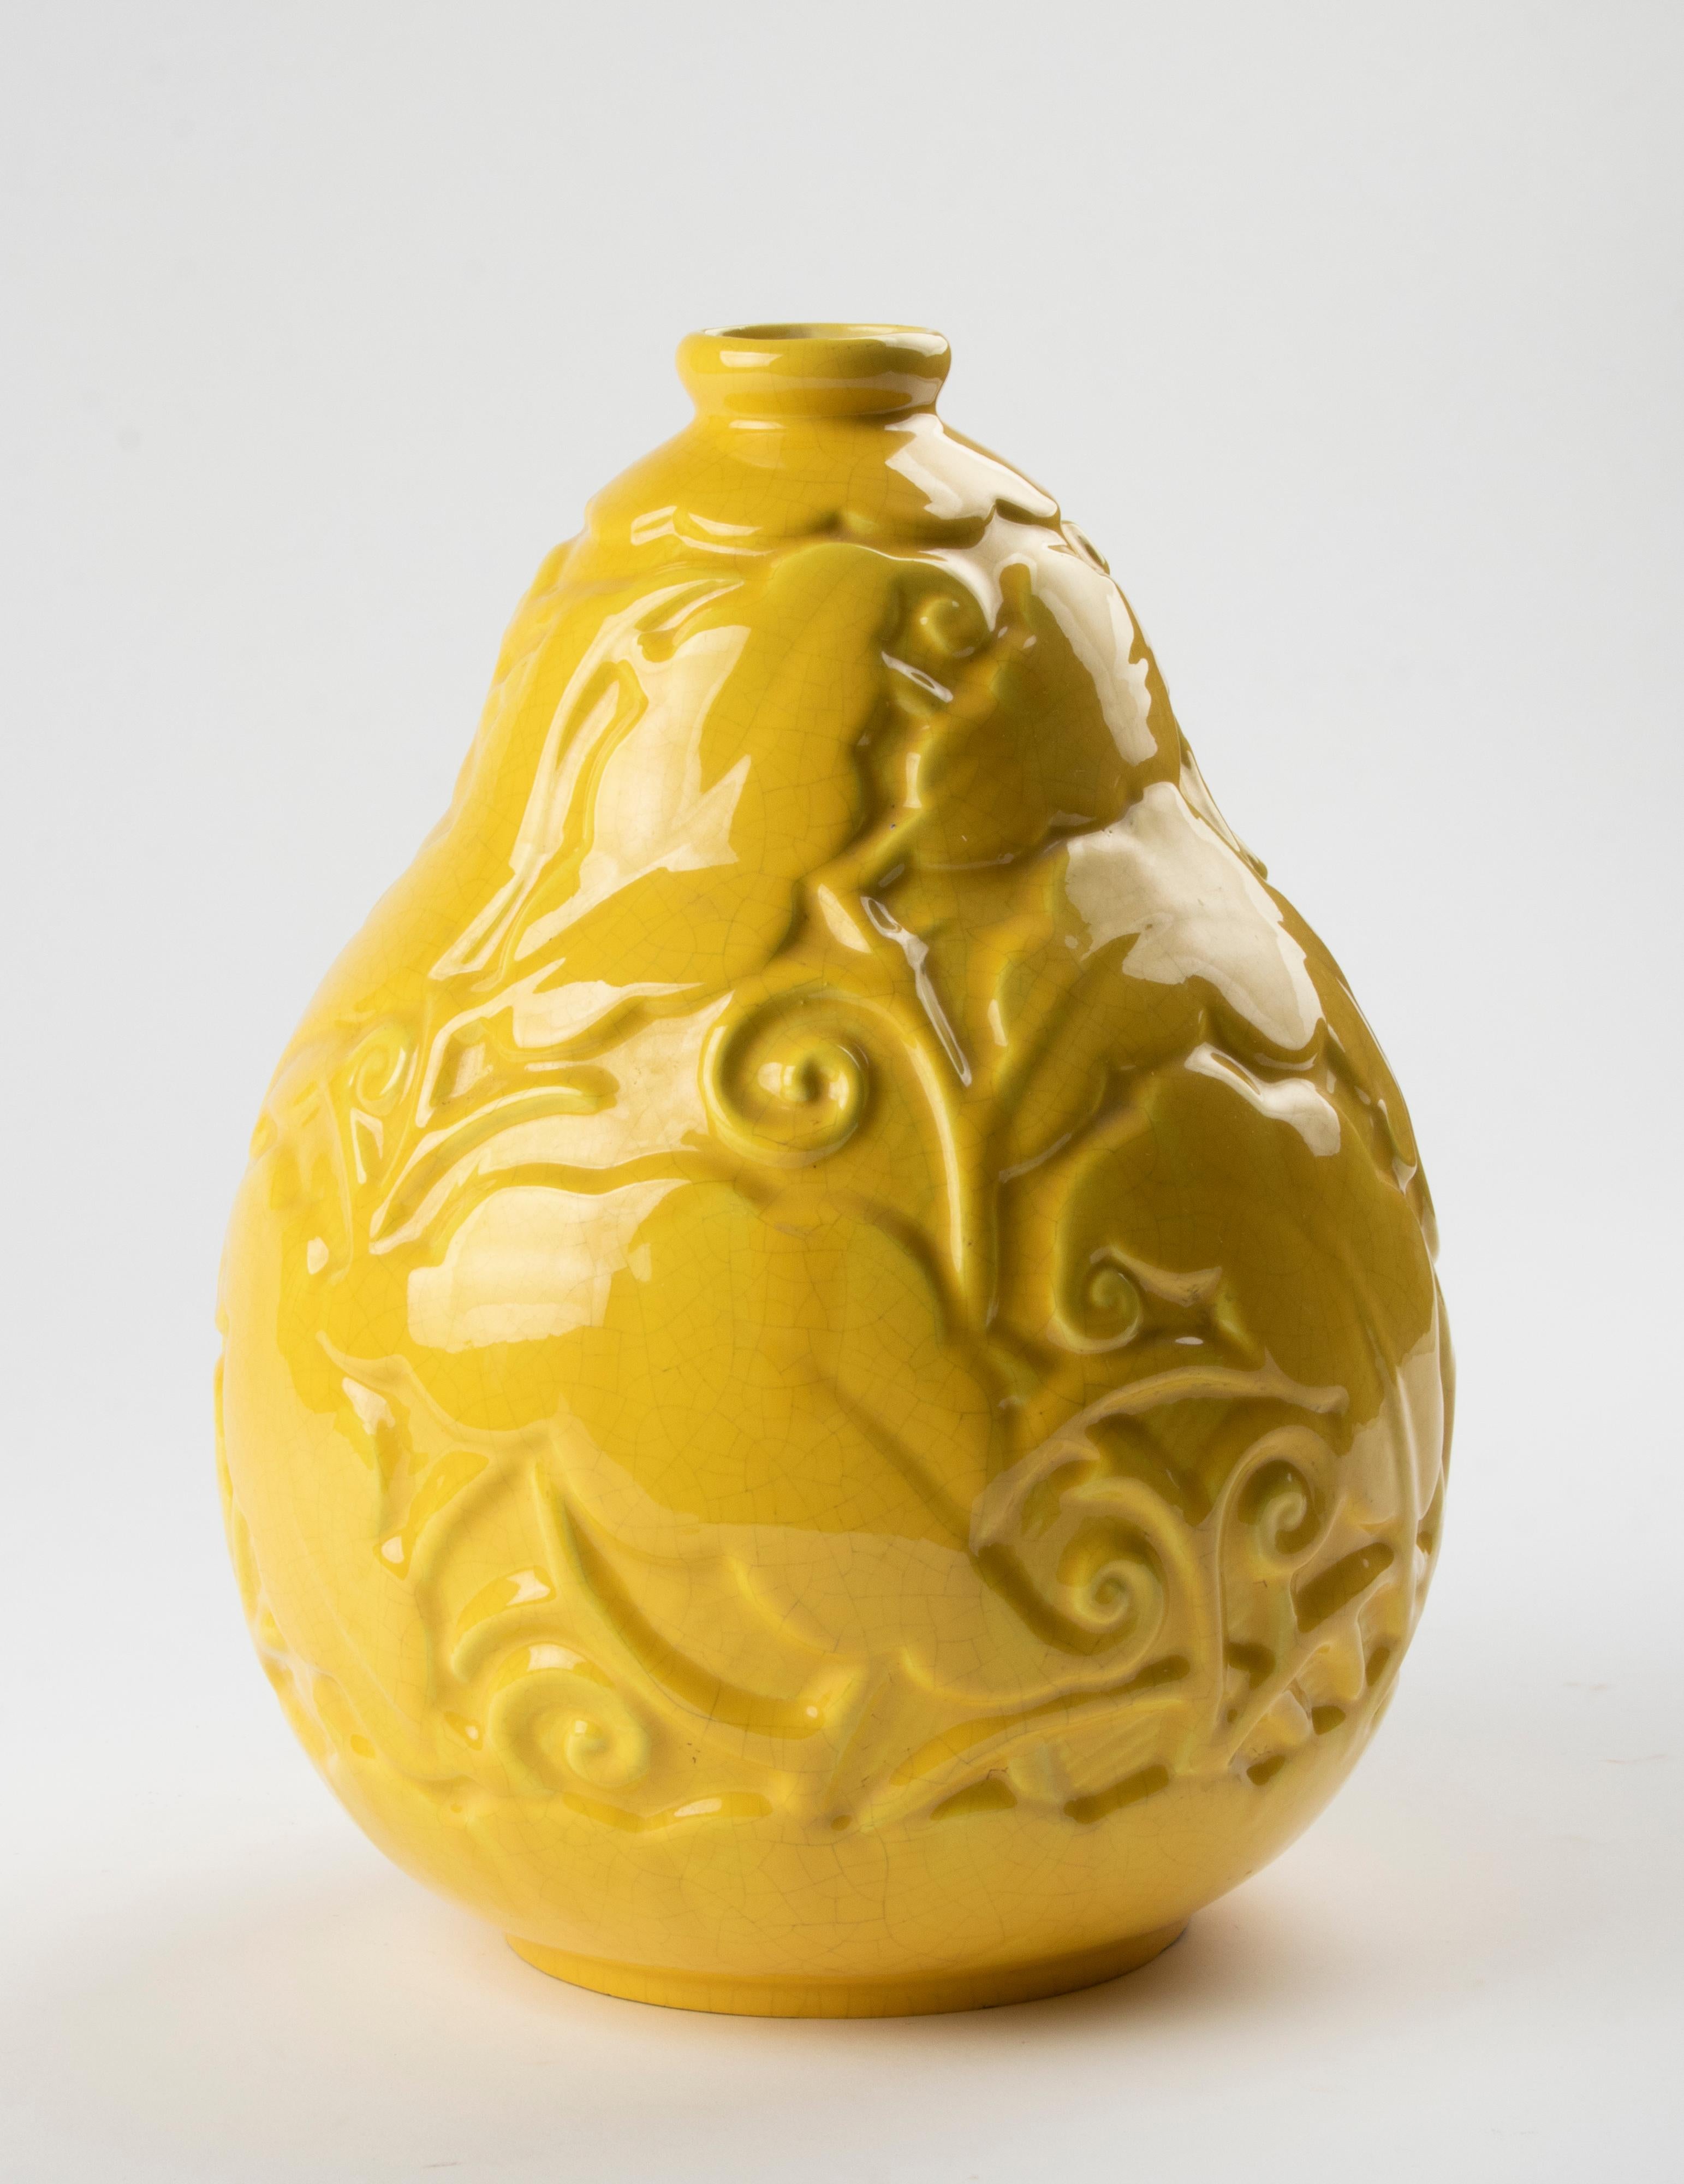 Early 20th Century Ceramic Art Deco Vase Made by Saint-Clément 5